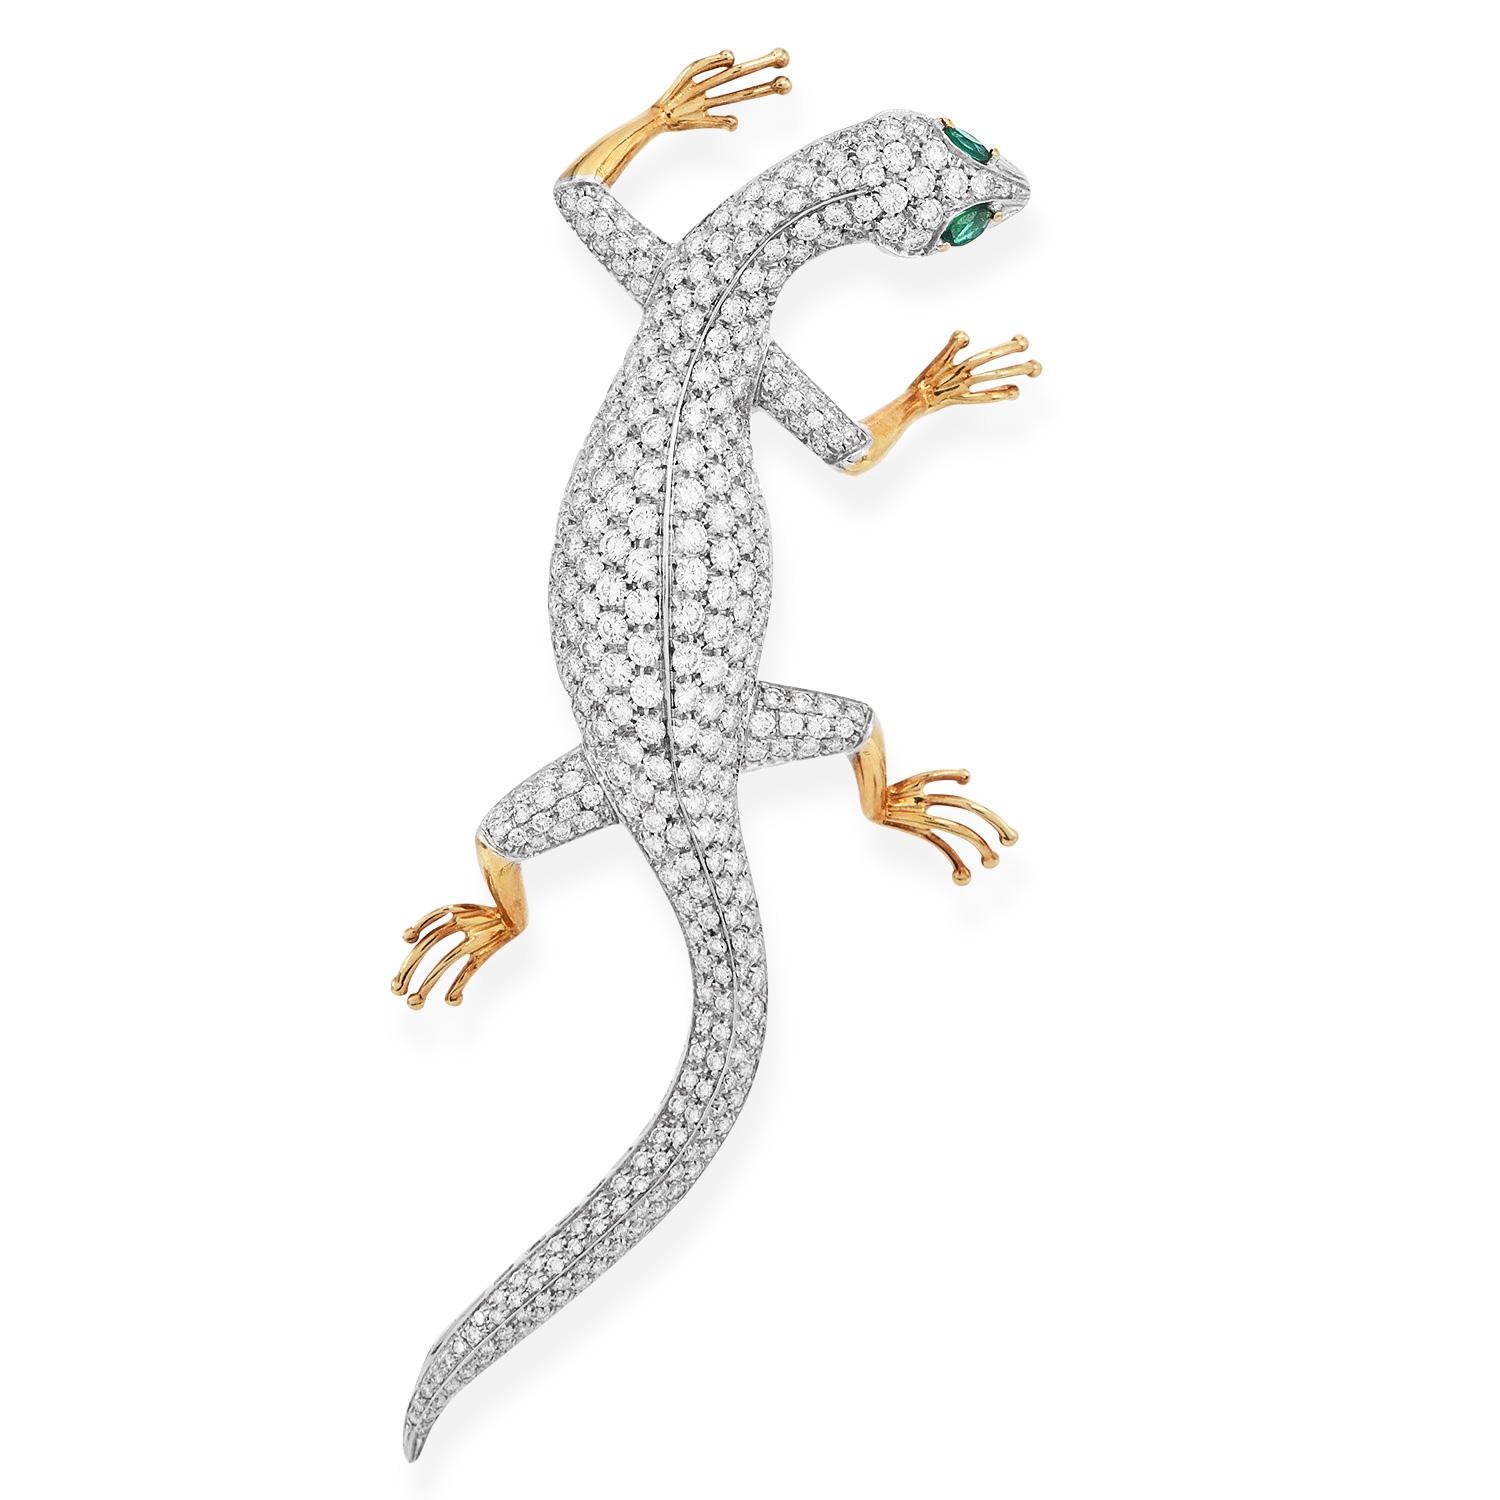 Presenting from the house of Garavelli a Lizard Motif Brooch Pin adorned with Natural Round Diamonds and Natural Emerald Gemstone eye.

Crafted In 18K Yellow and white and yellow gold.

Marked: 